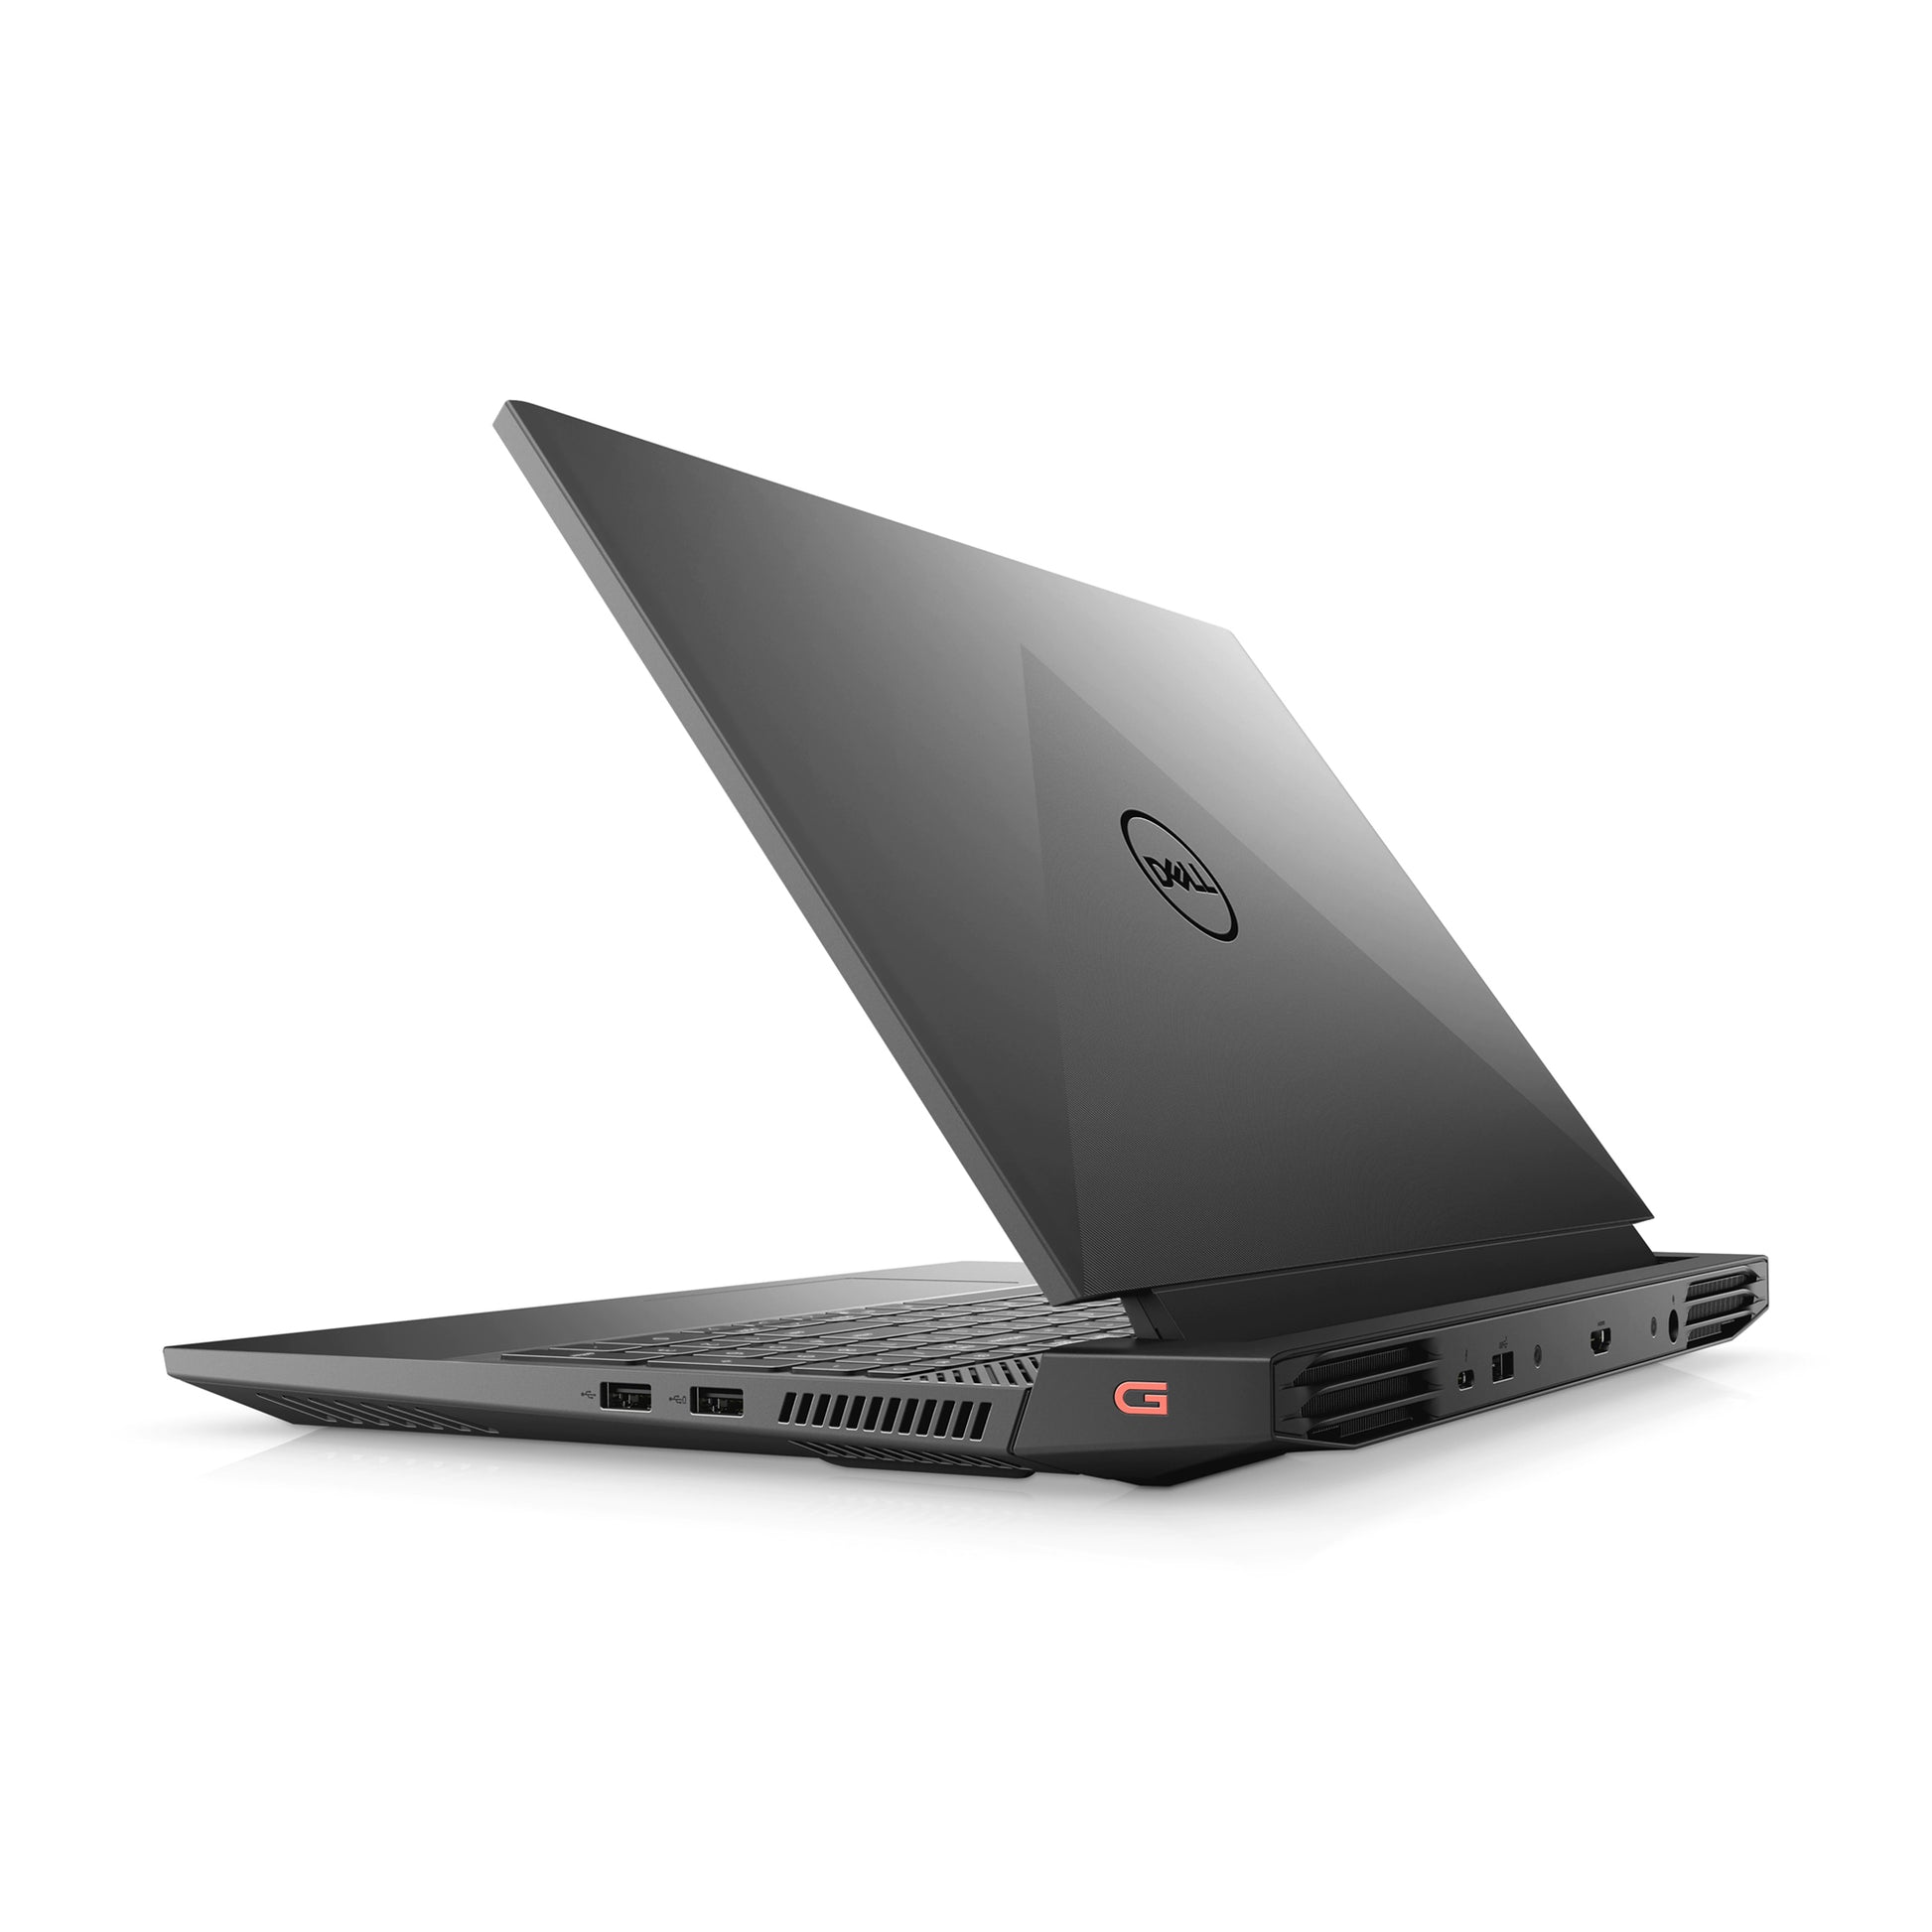 Dell G15 5510 RTX 3060 Gaming Laptop (Brand New), Gaming laptop, Graphic Design laptop, best laptop for gaming, Best laptop for graphic design, computer for sale Lebanon, laptop for video editing in Lebanon, laptop for sale Lebanon, Best graphic design laptop,	Best video editing laptop, Best programming laptop, laptop for sale in Lebanon, laptops for sale in Lebanon, laptop for sale in Lebanon, buy computer Lebanon, buy laptop Lebanon.